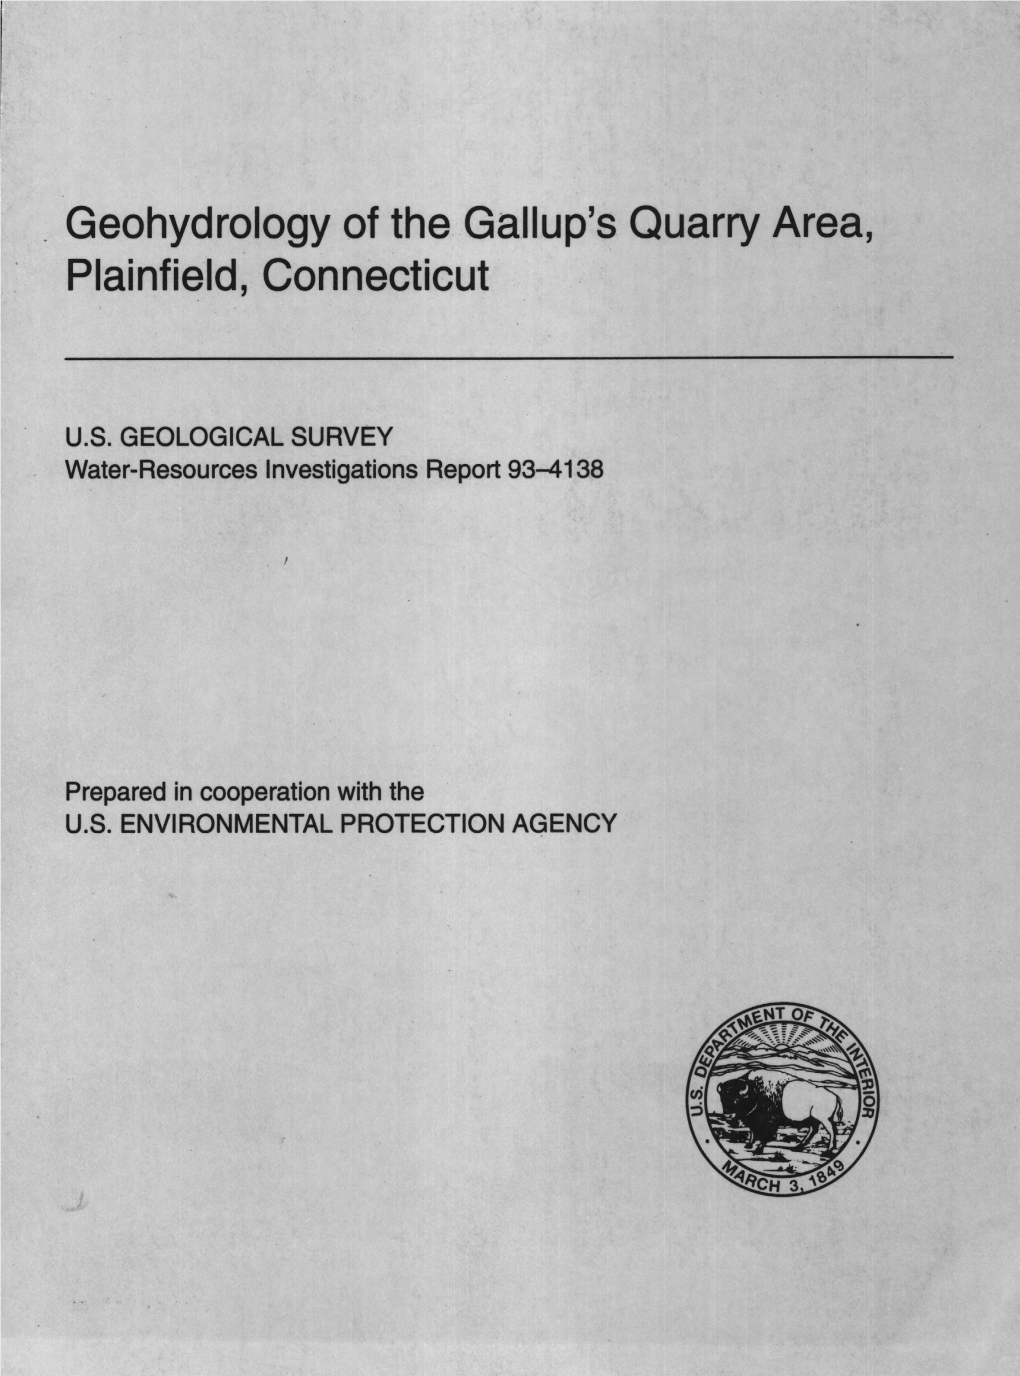 Geohydrology of the Gallup's Quarry Area, Plainfield, Connecticut